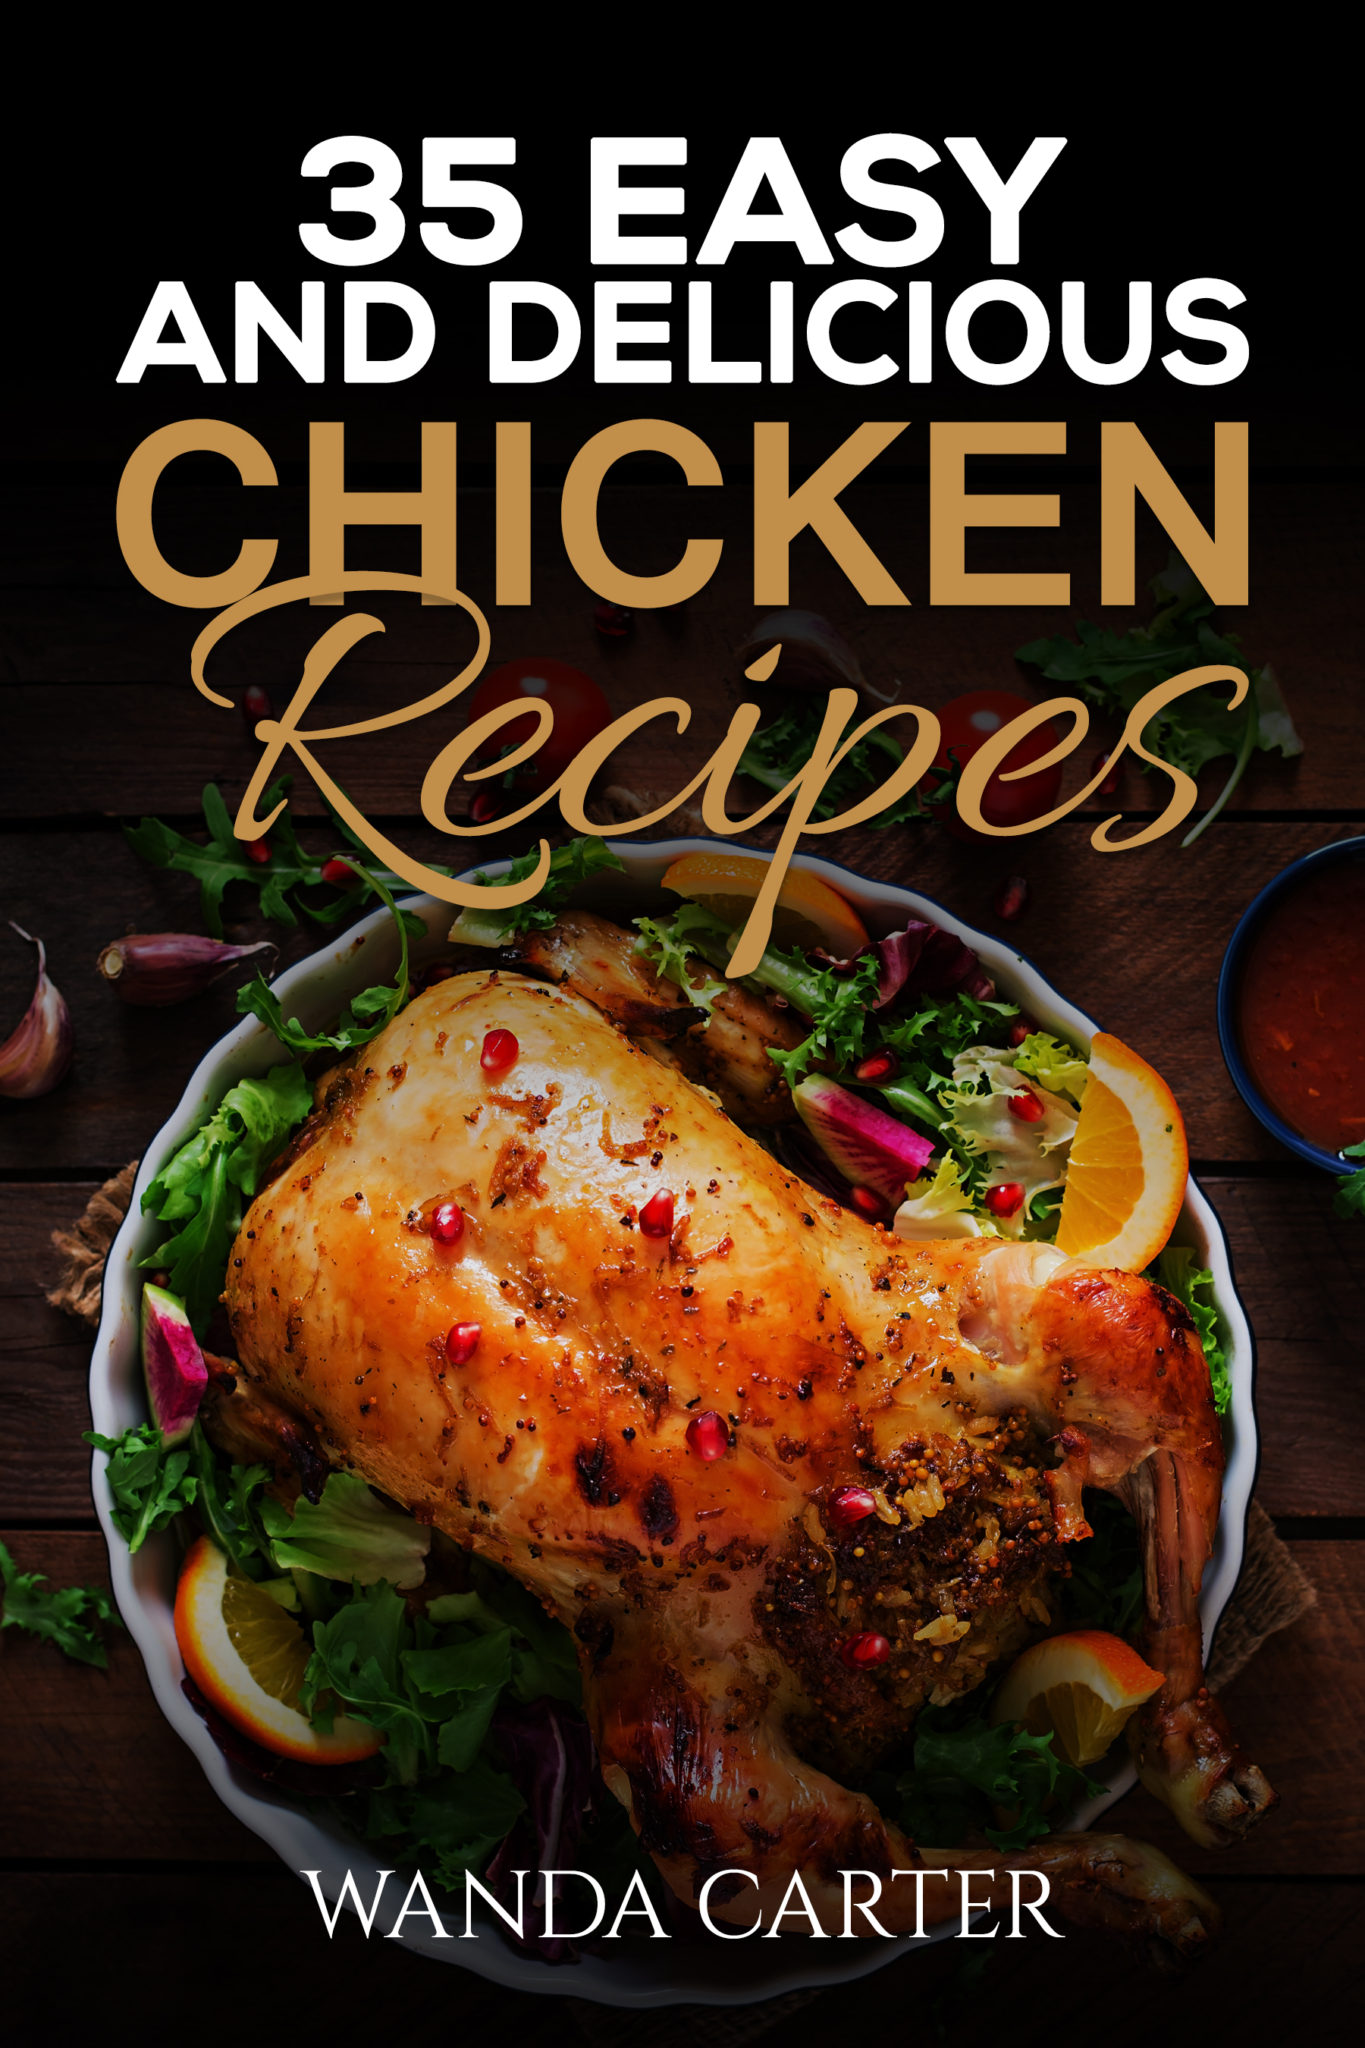 FREE: 35 Easy and Delicious Chicken Recipes: Chicken Recipes (Easy Chicken Recipes) Easy and Delicious Chicken Recipes (Baked Chicken, Grilled Chicken, Fried Chicken, and MORE!) by Wanda Carter